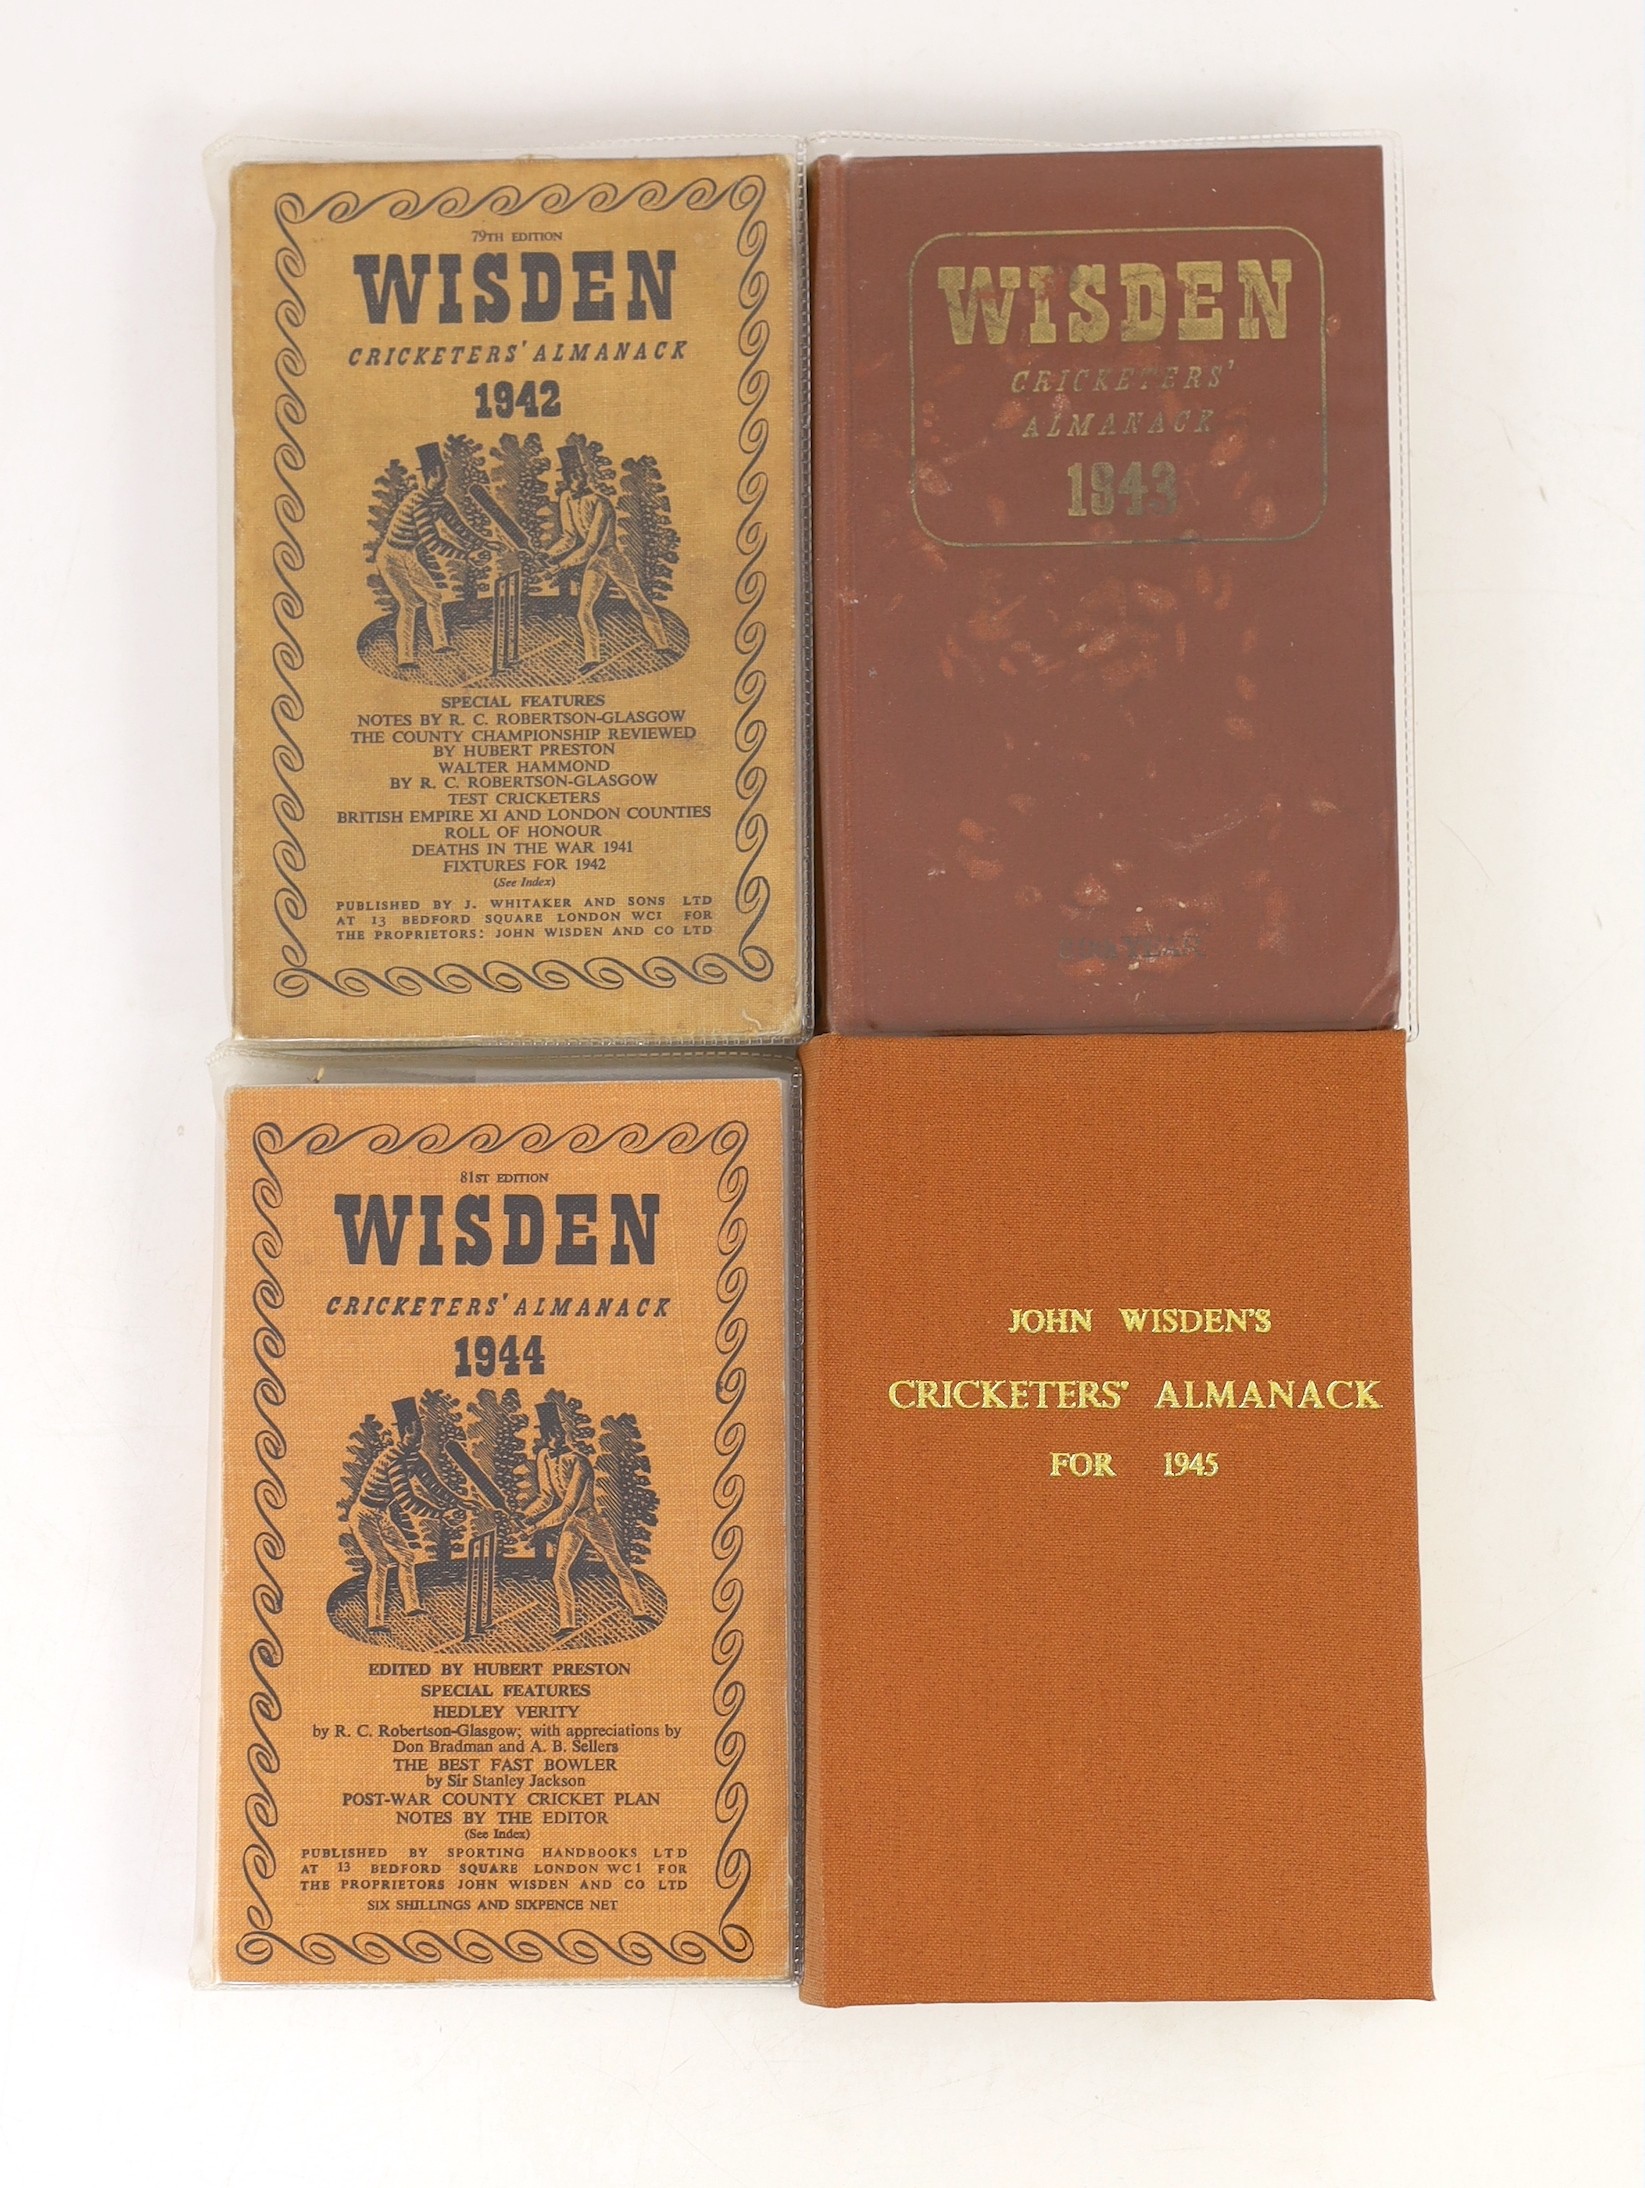 Wisden, John - Cricketers Almanack for the Second World War Years - 1939 (76th edition) - 1945 (82nd edition), rebound issues for 1939, 1941 and 1945, all retaining original paper wrappers, original hardbacks for 1940 an